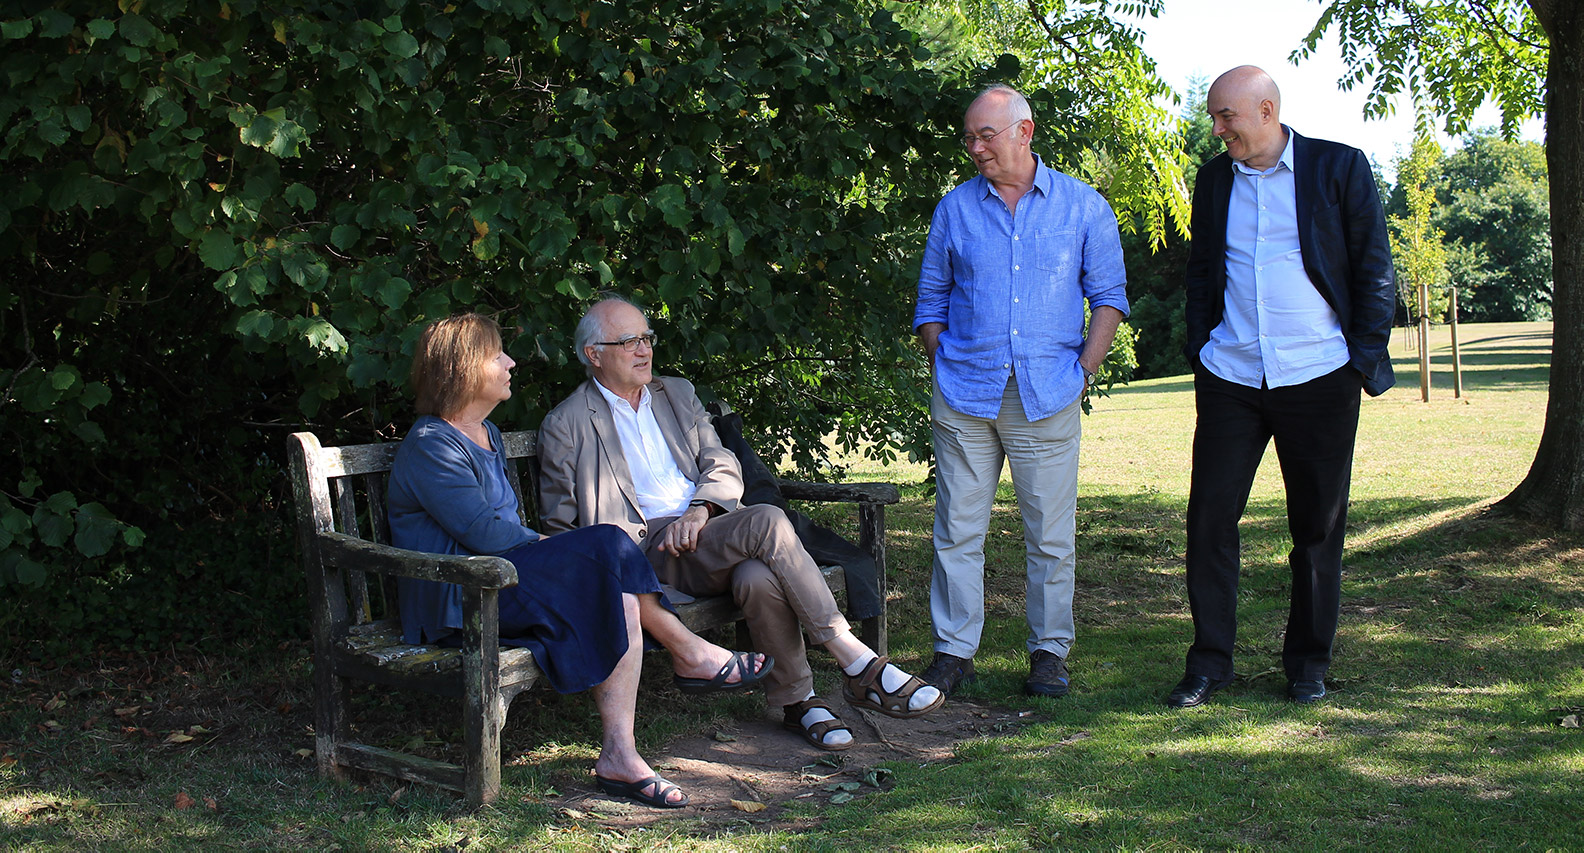 Teachers Christina Feldman and Stephen Batchelor seated on a bench outdoors in conversation with John Peacock and Akincano Weber standing beside them.